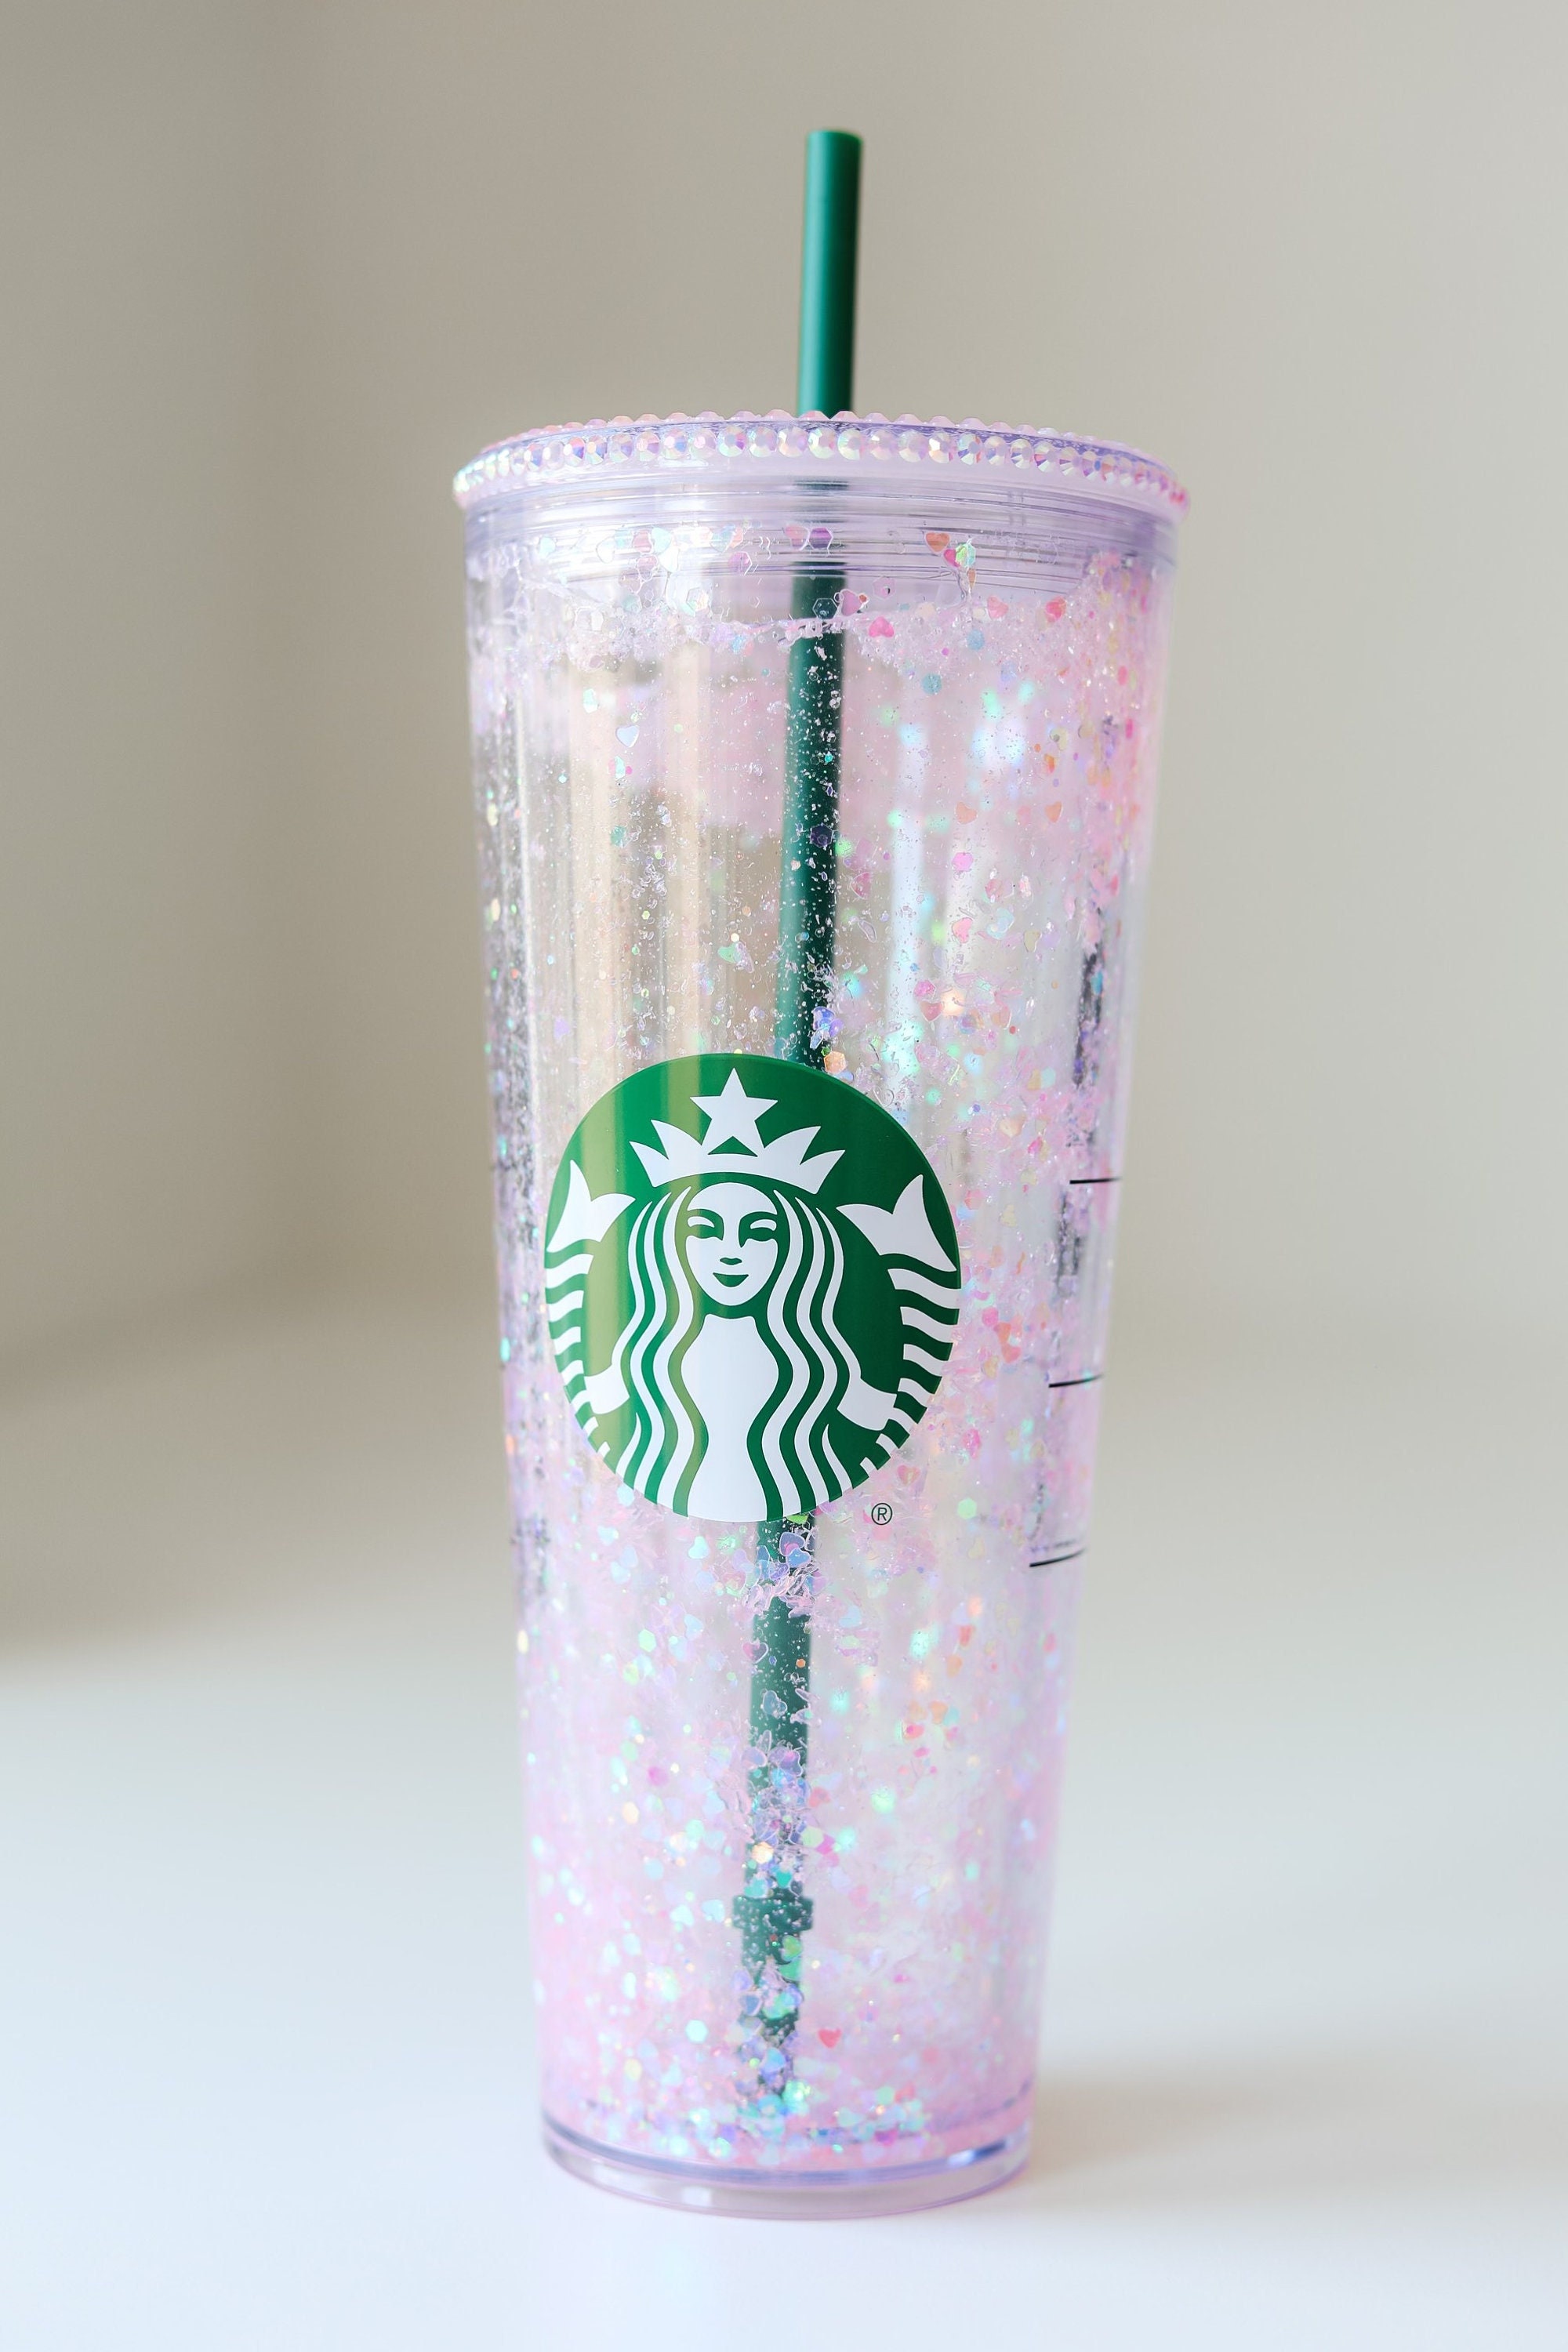 Blinkerbell Personalized Floating Glitter Venti Starbucks Cup Pink and Black